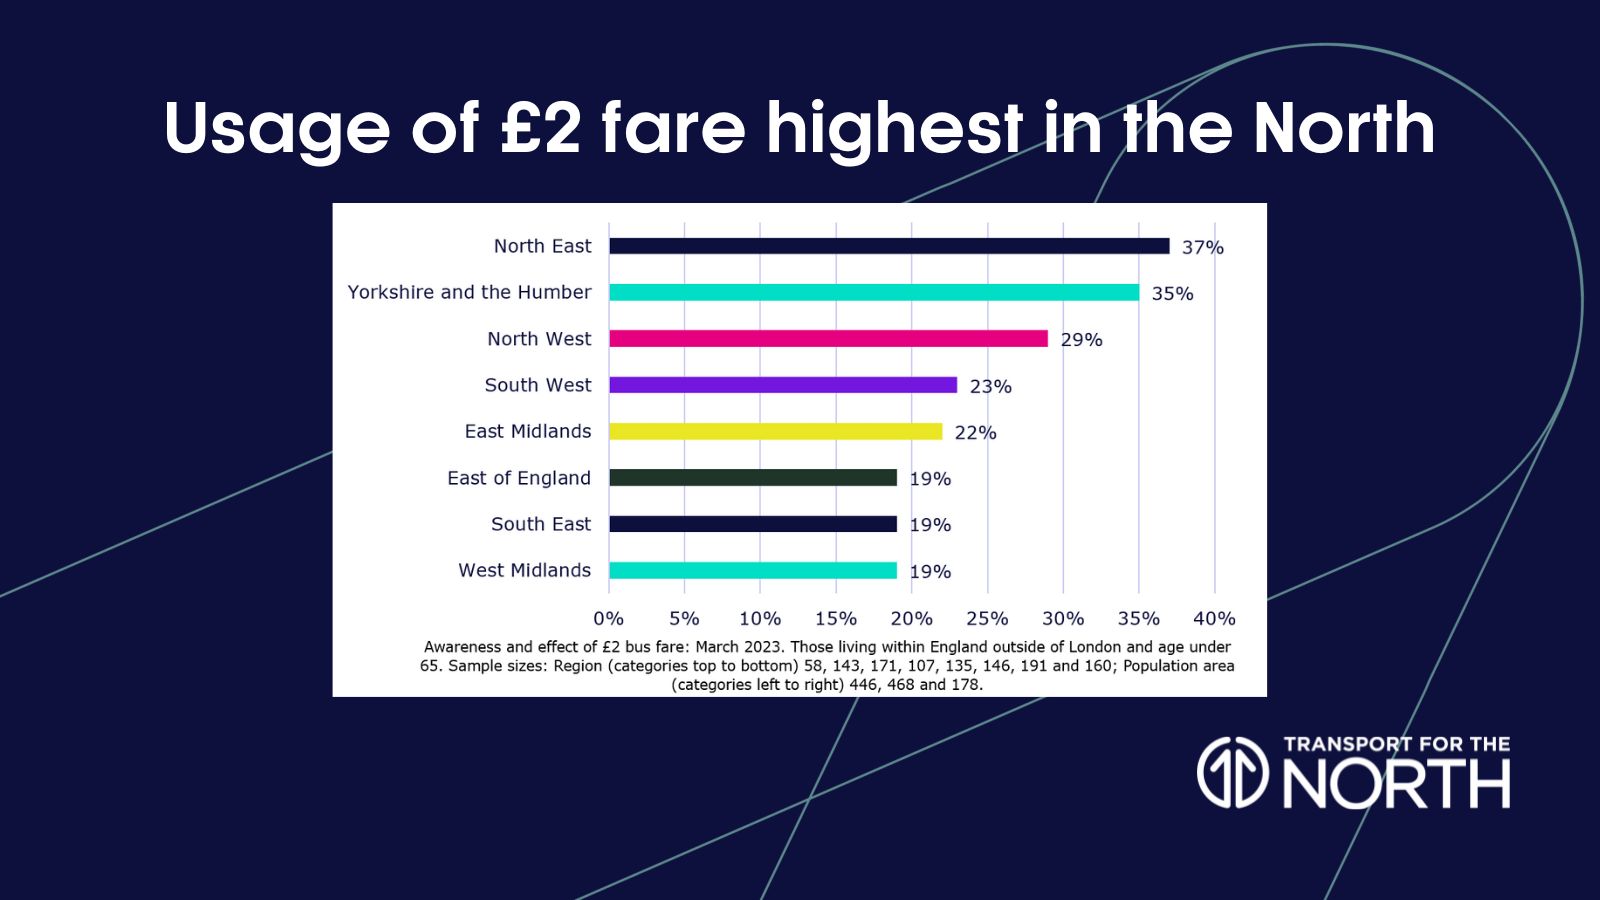 Usage of £2 bus fares across the UK chart